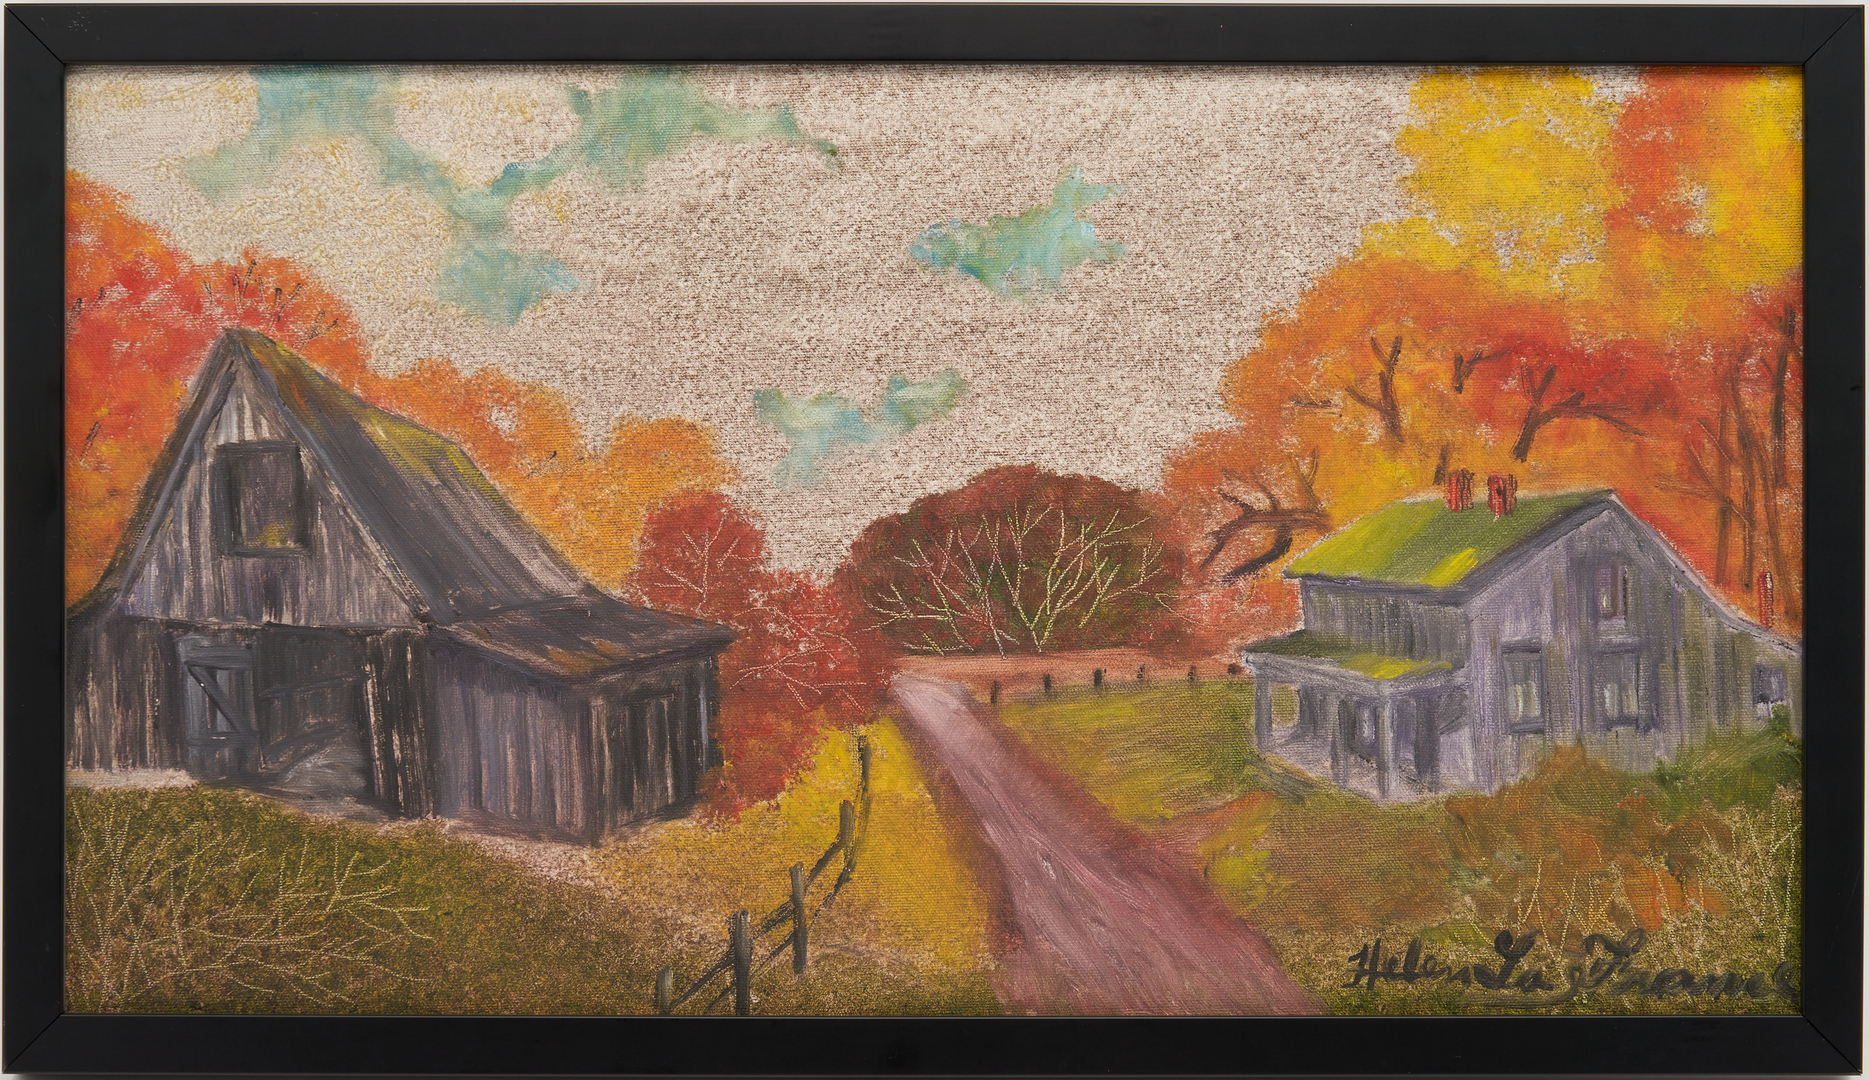 Lot 106: Helen LaFrance O/B Painting, Autumn Landscape with Farmhouses